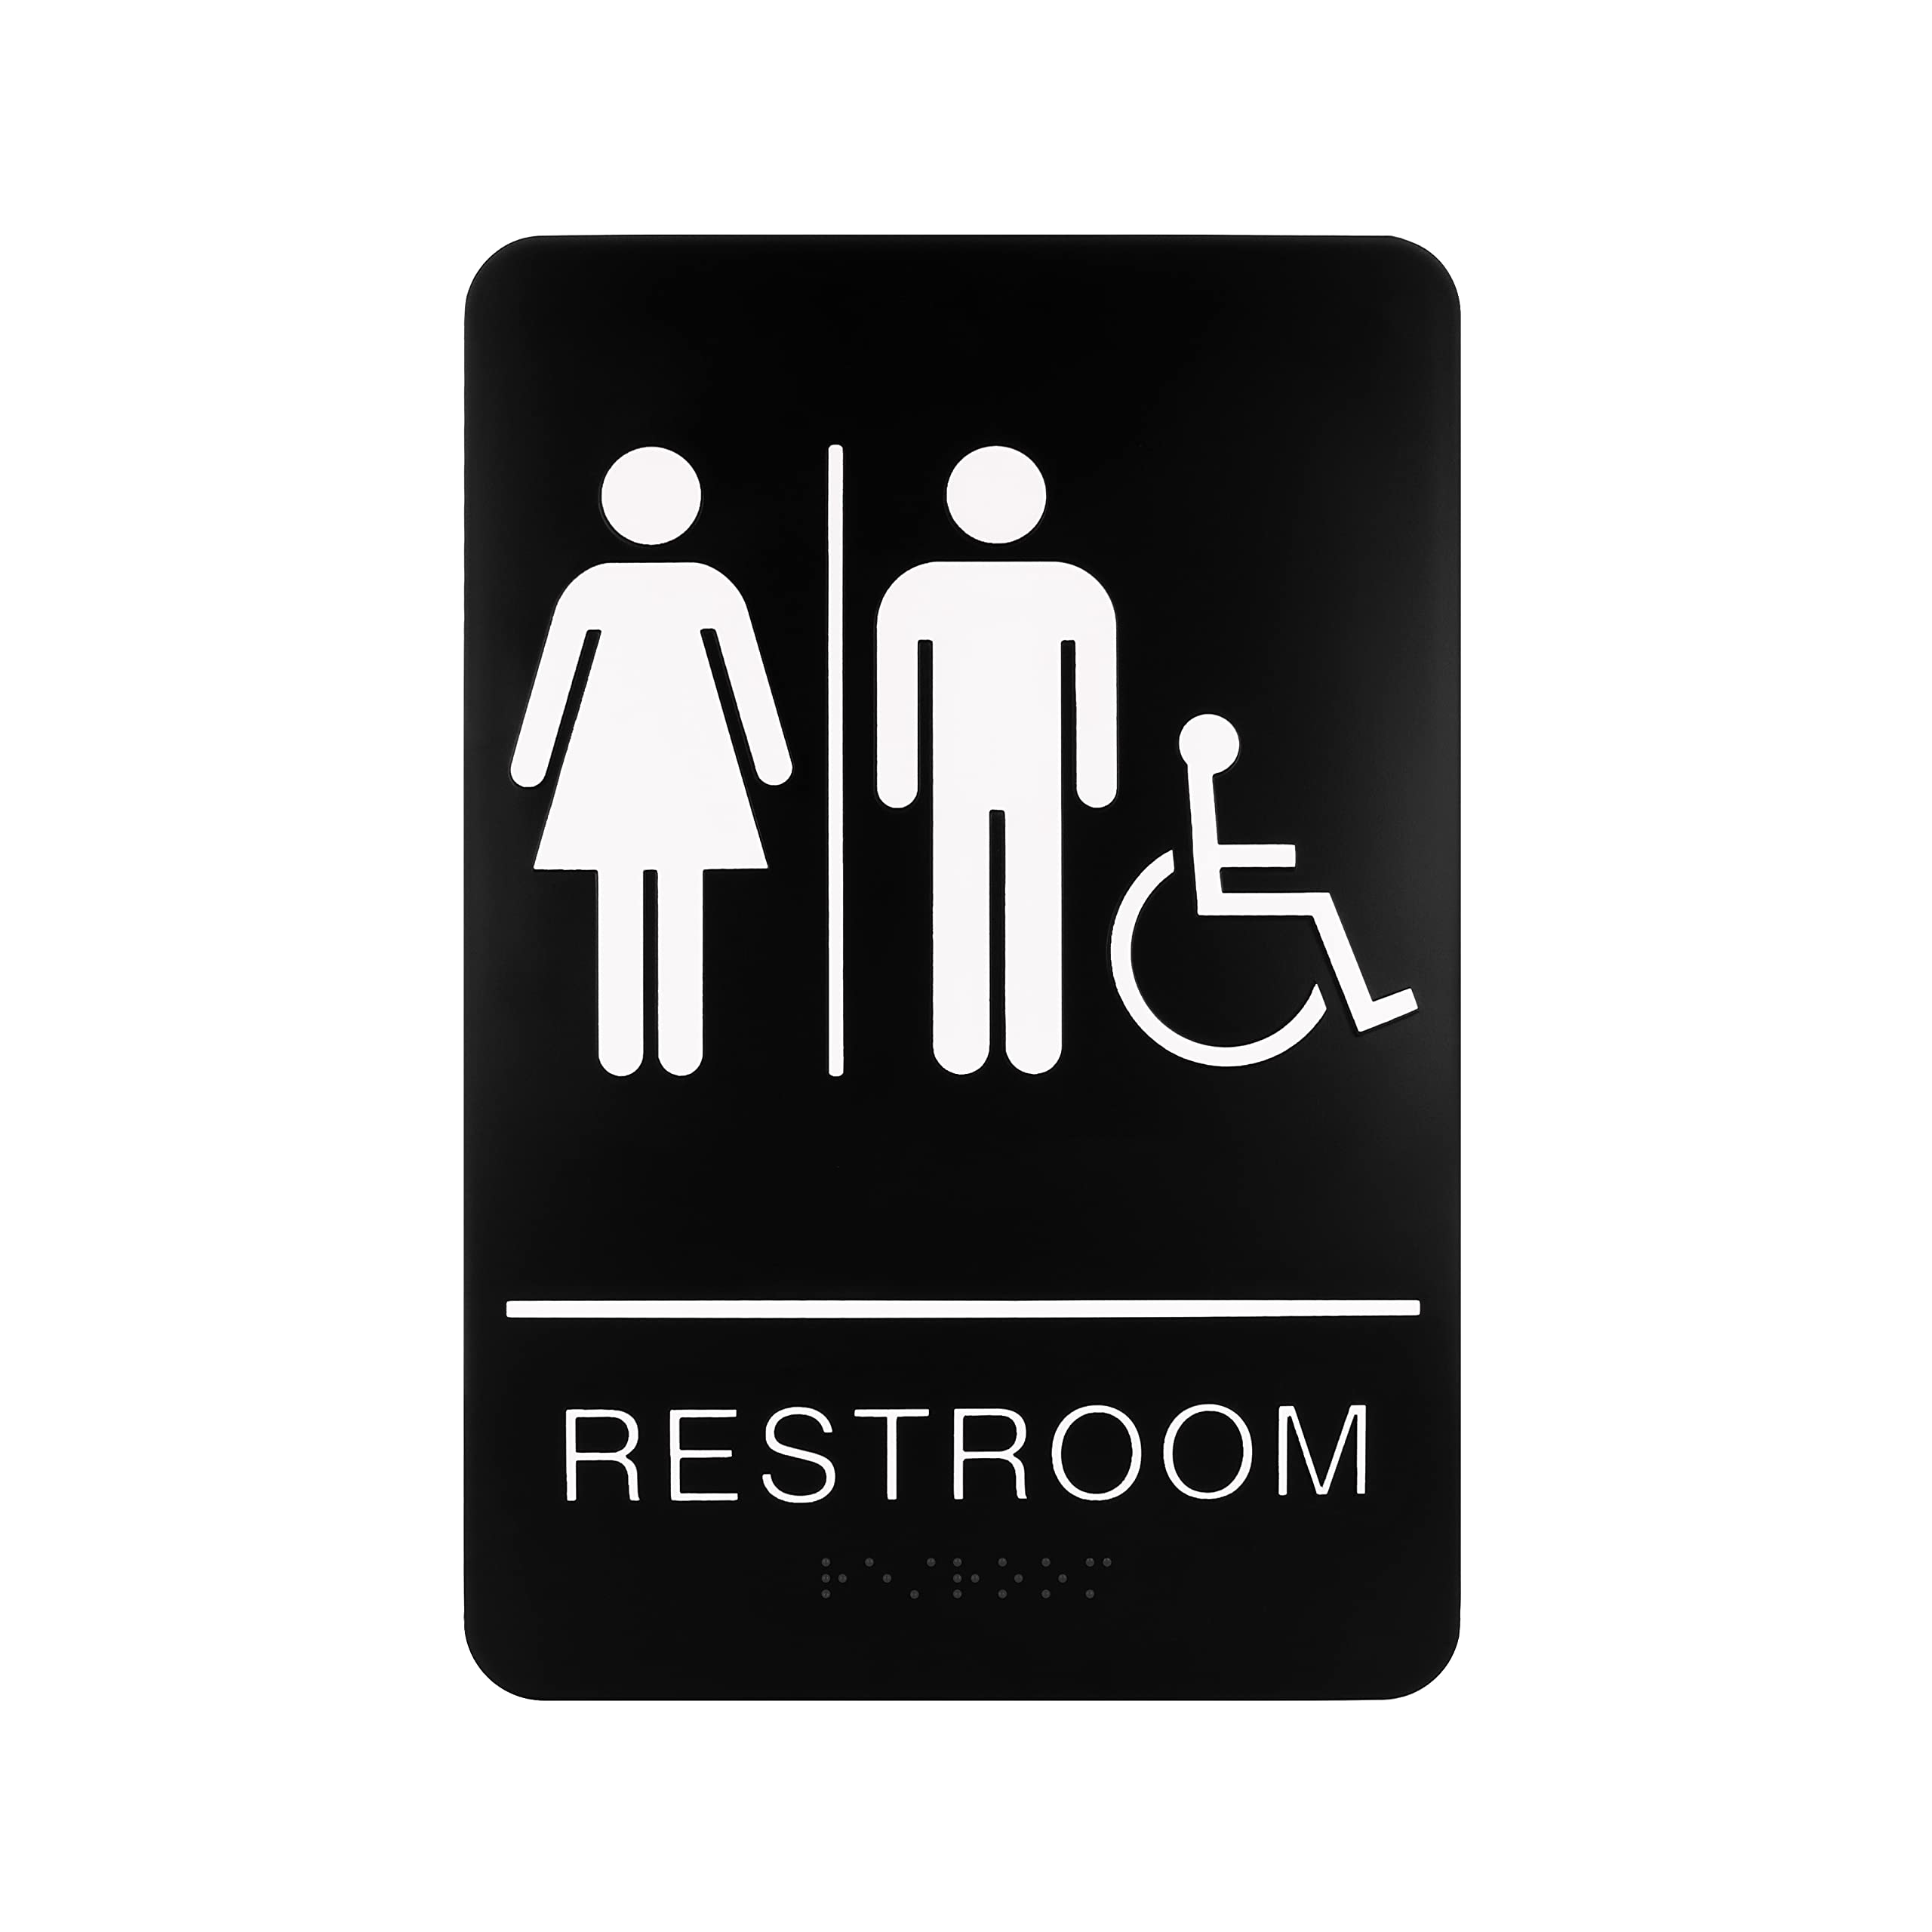 ExcelMark Restroom Sign for Business - ADA compliant Braille Bathroom Sign with Double Sided Tape to Secure Perfectly in Less Than a Minut